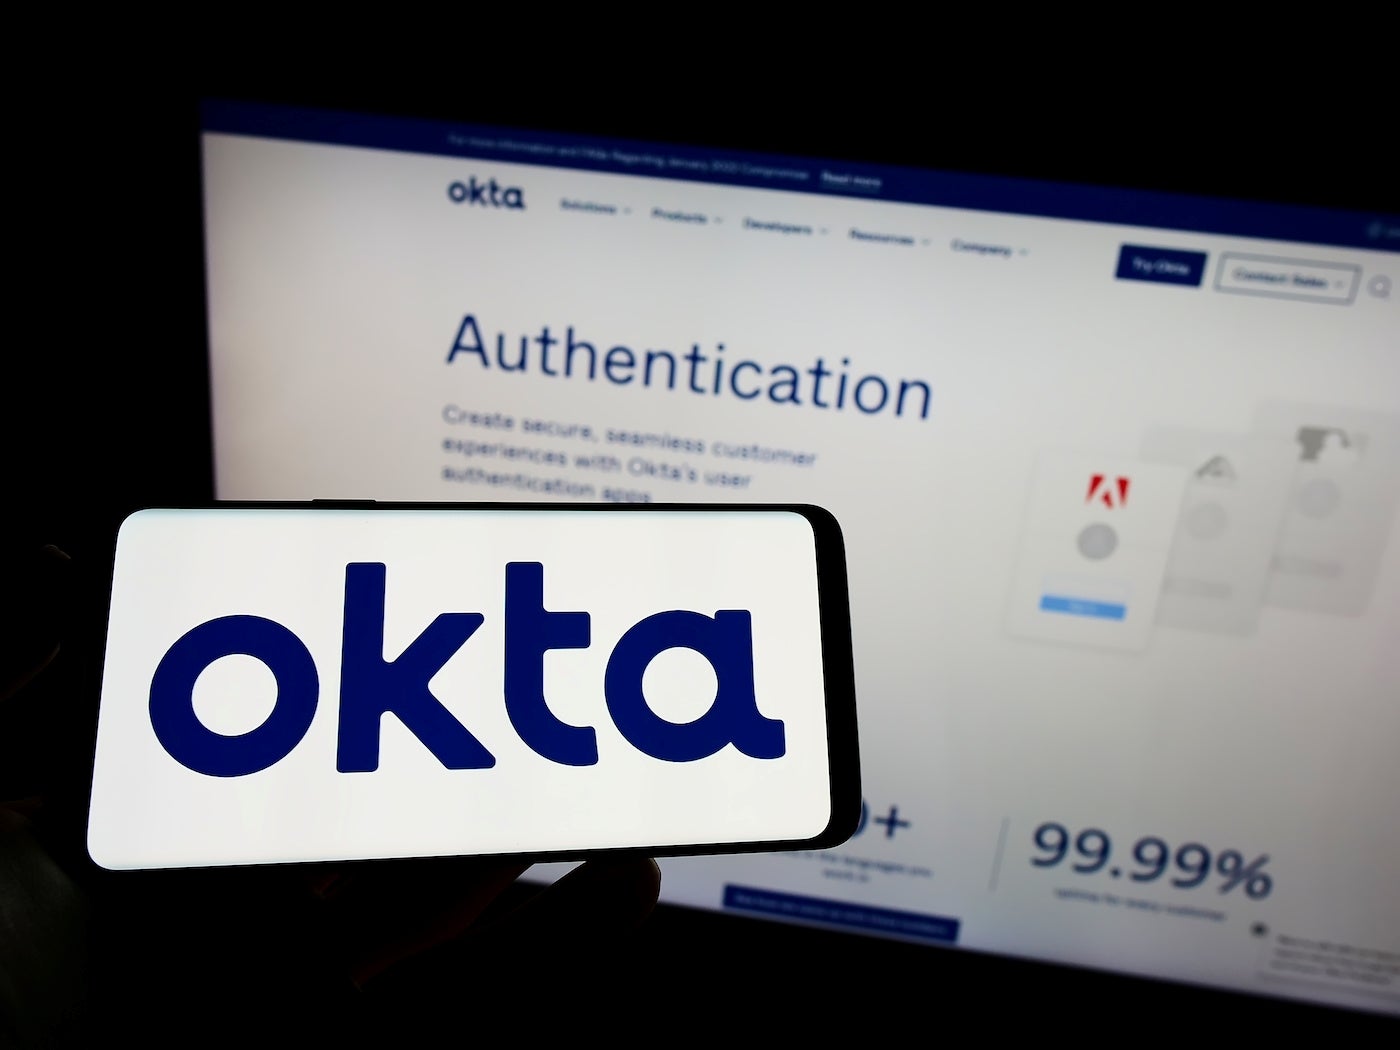 A person holding up their phone with the Okta logo on it in front of a page on the Okta website for Authentication